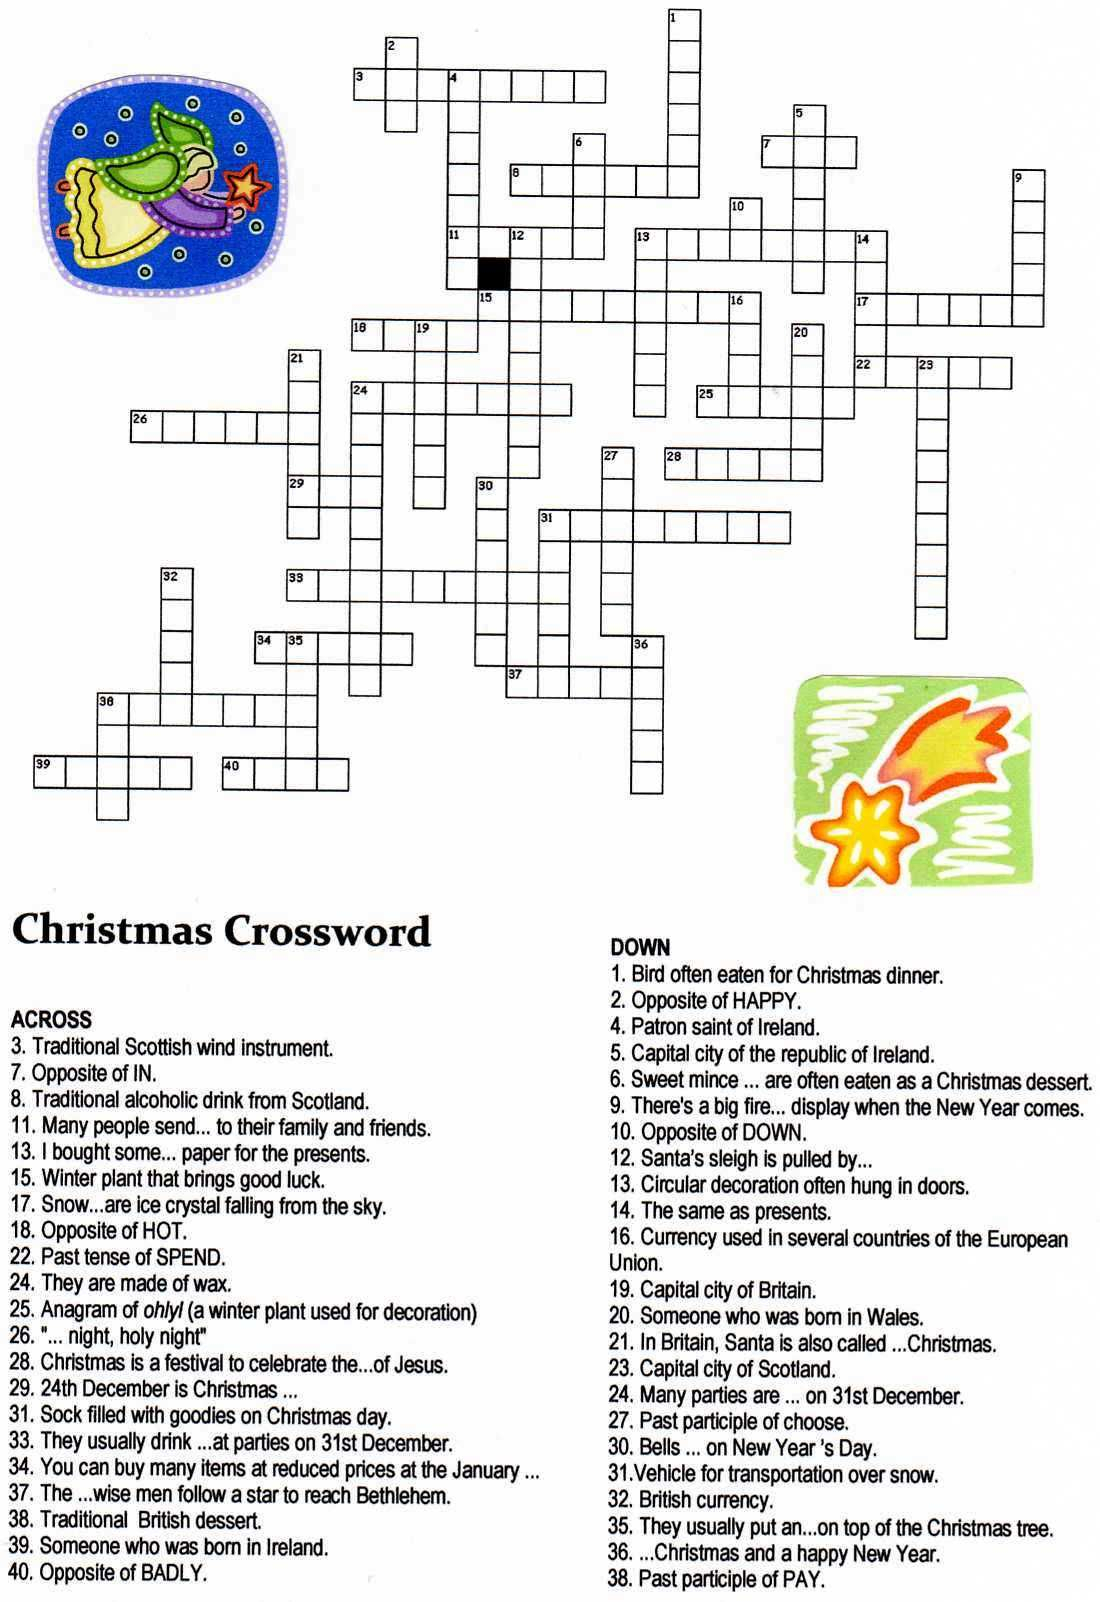 Christmas Story Printable Crossword Puzzle